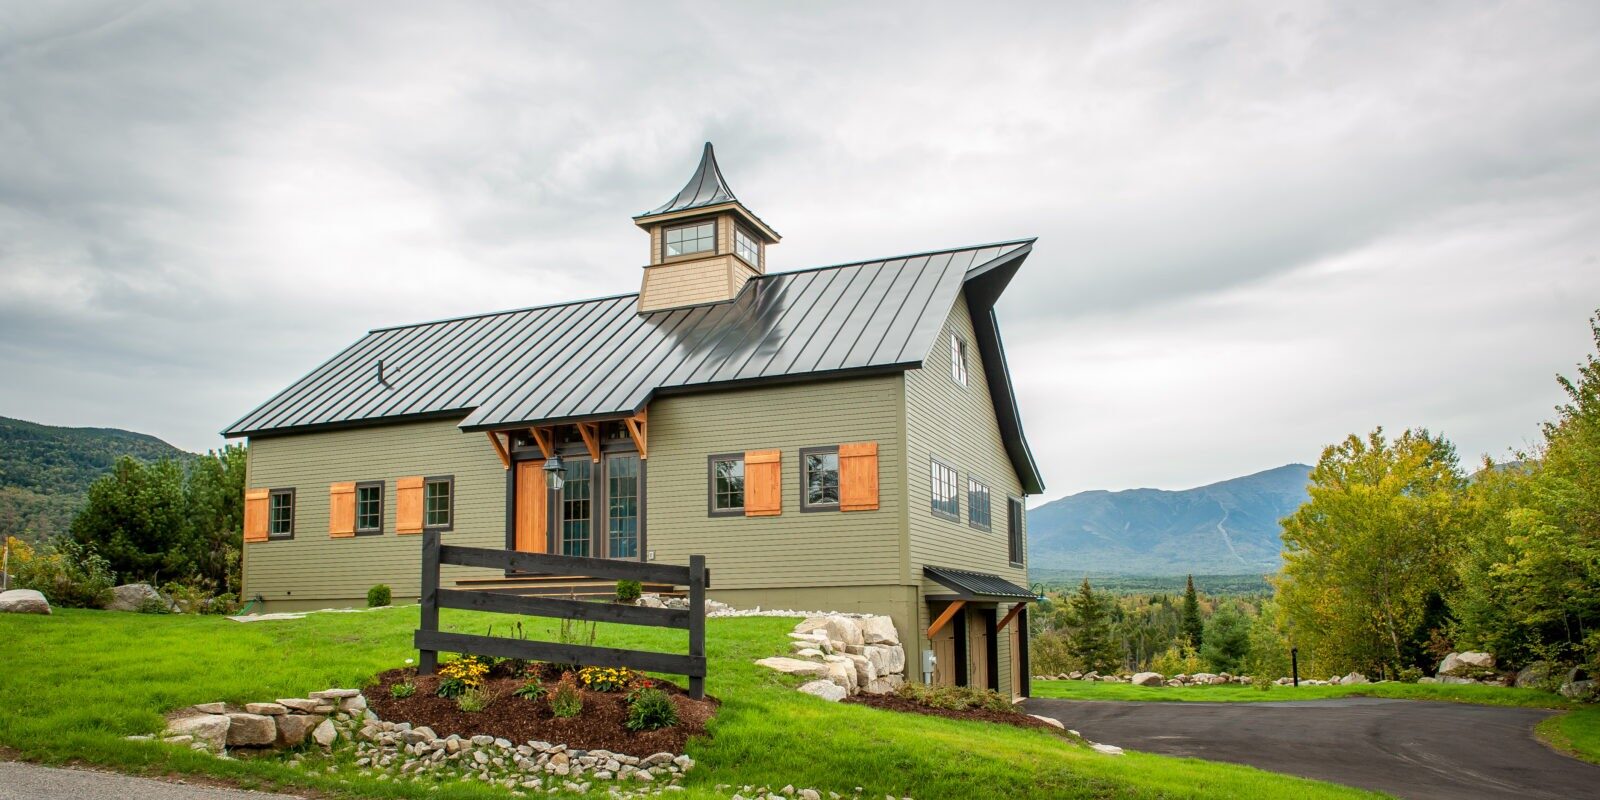 Top Notch Barn Home Plans From The Ybh